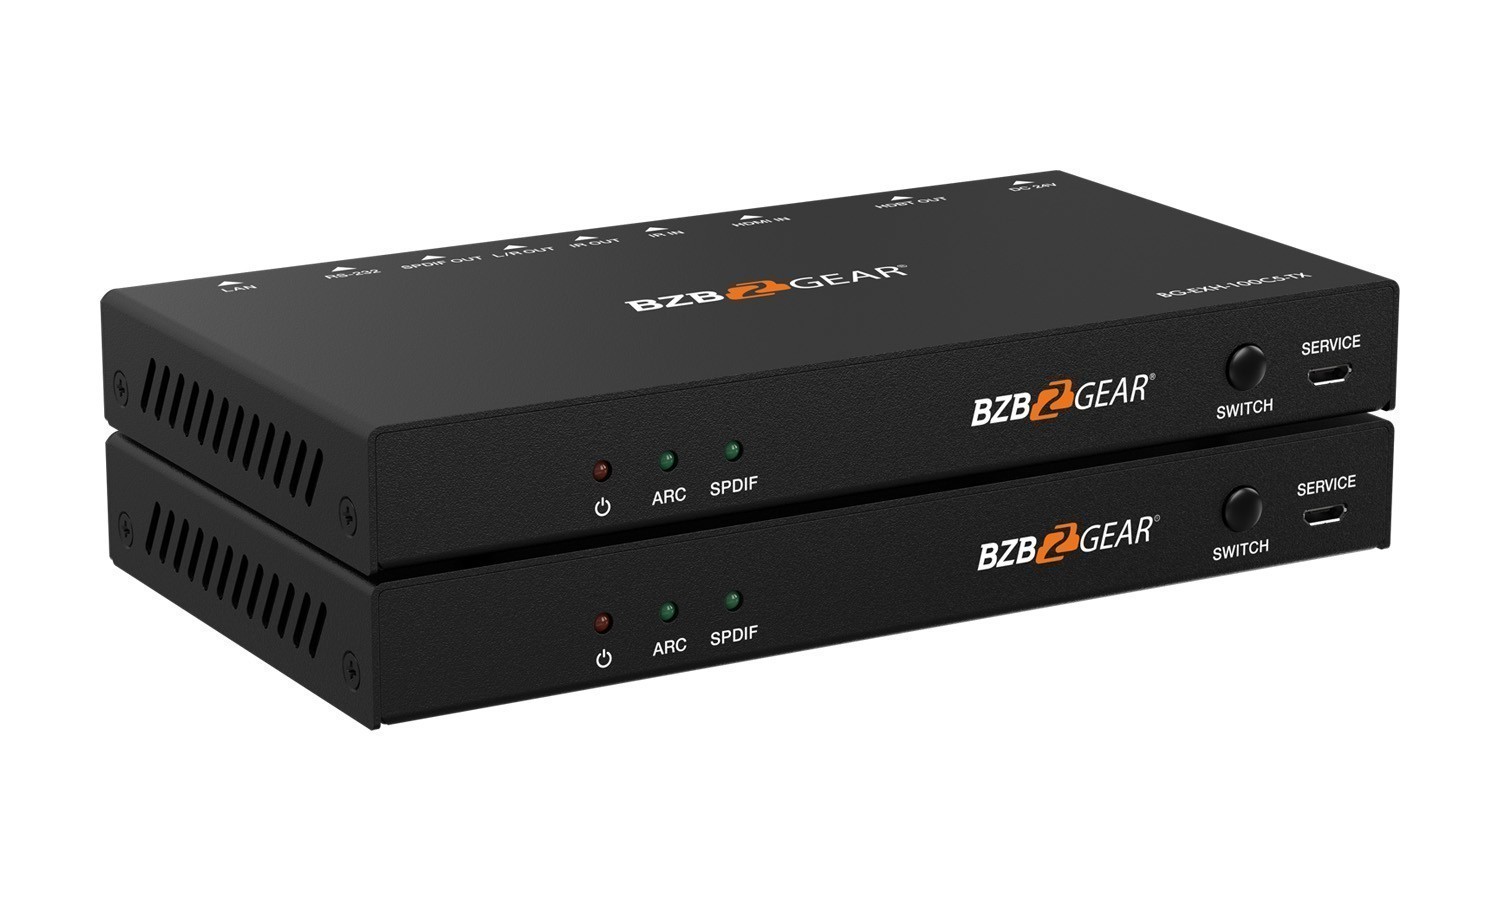 BG-EXH-100C5 4K UHD HDMI HDBaseT Extender with IR/ARC/PoC/RS-232/Ethernet and Audio Embedding/De-embedding up to 330ft by BZBGEAR